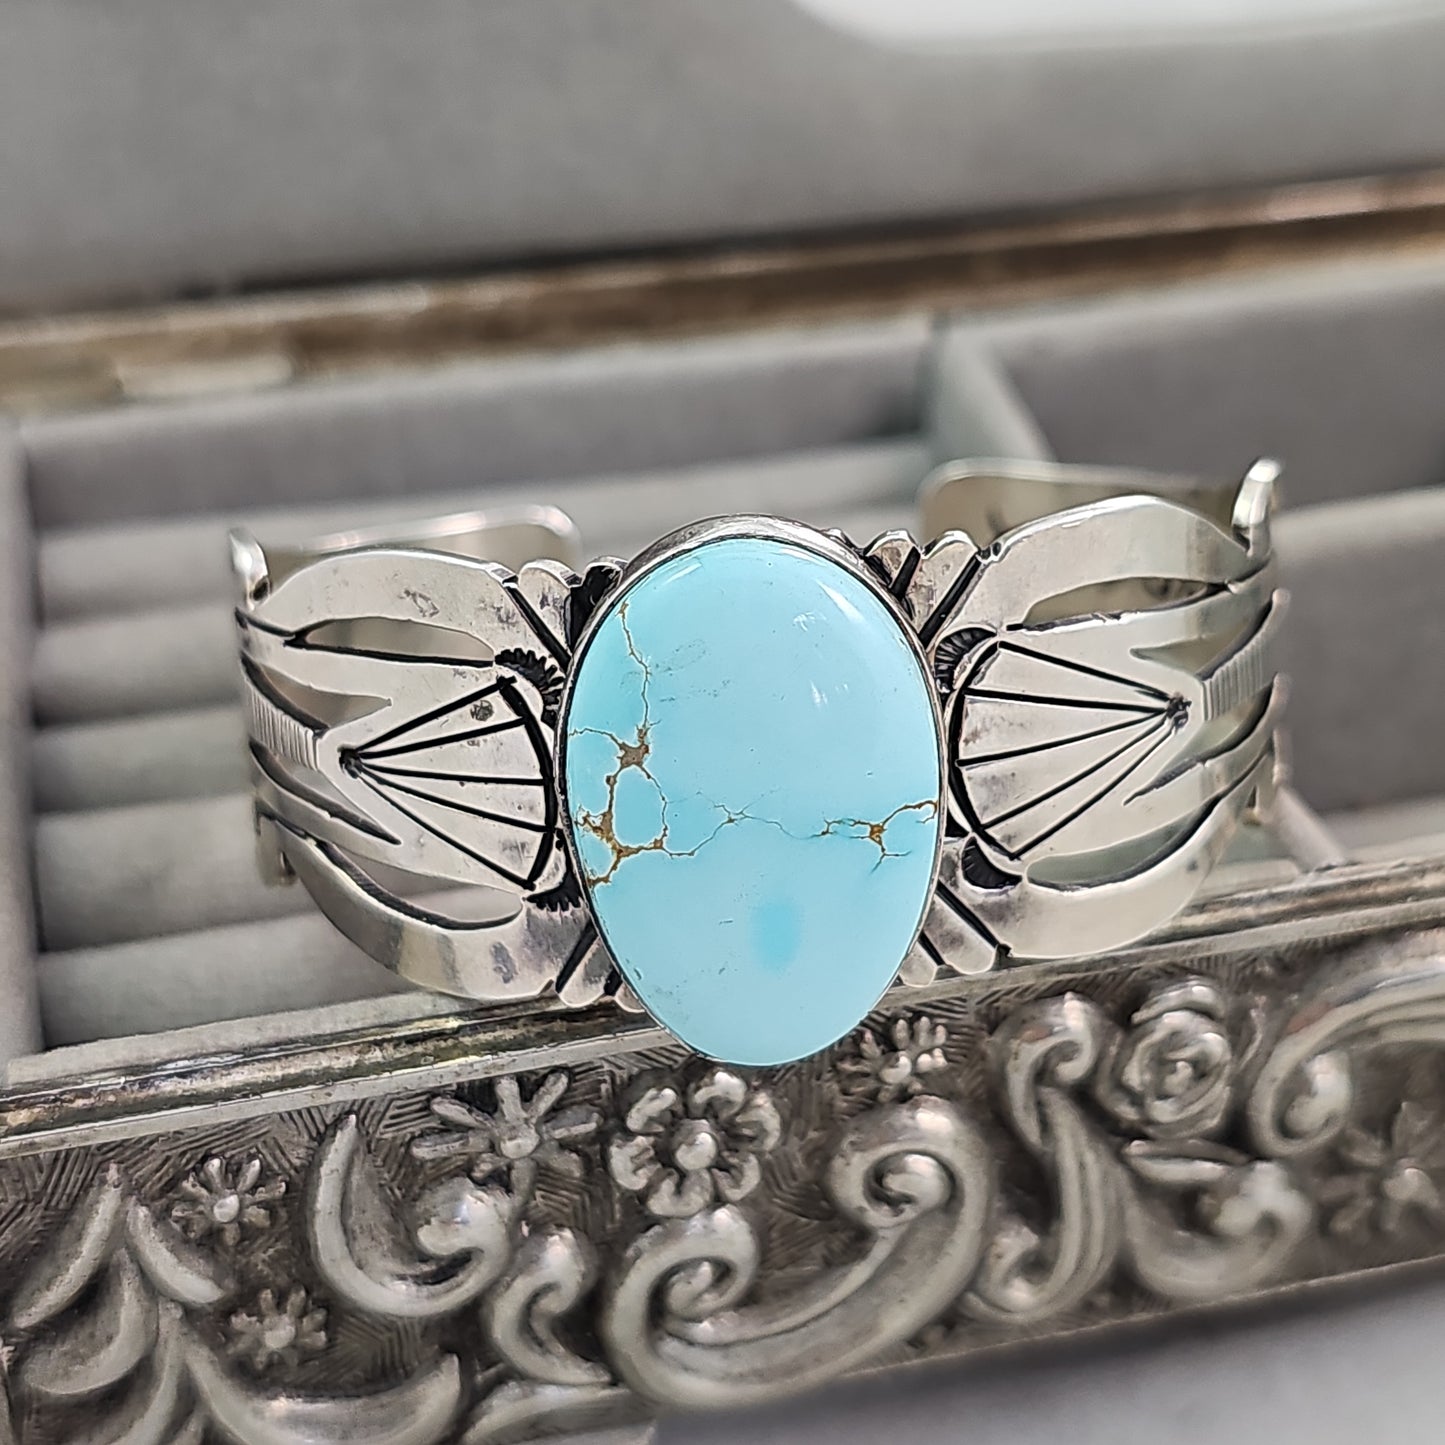 Turquoise cuff by Russell Sam